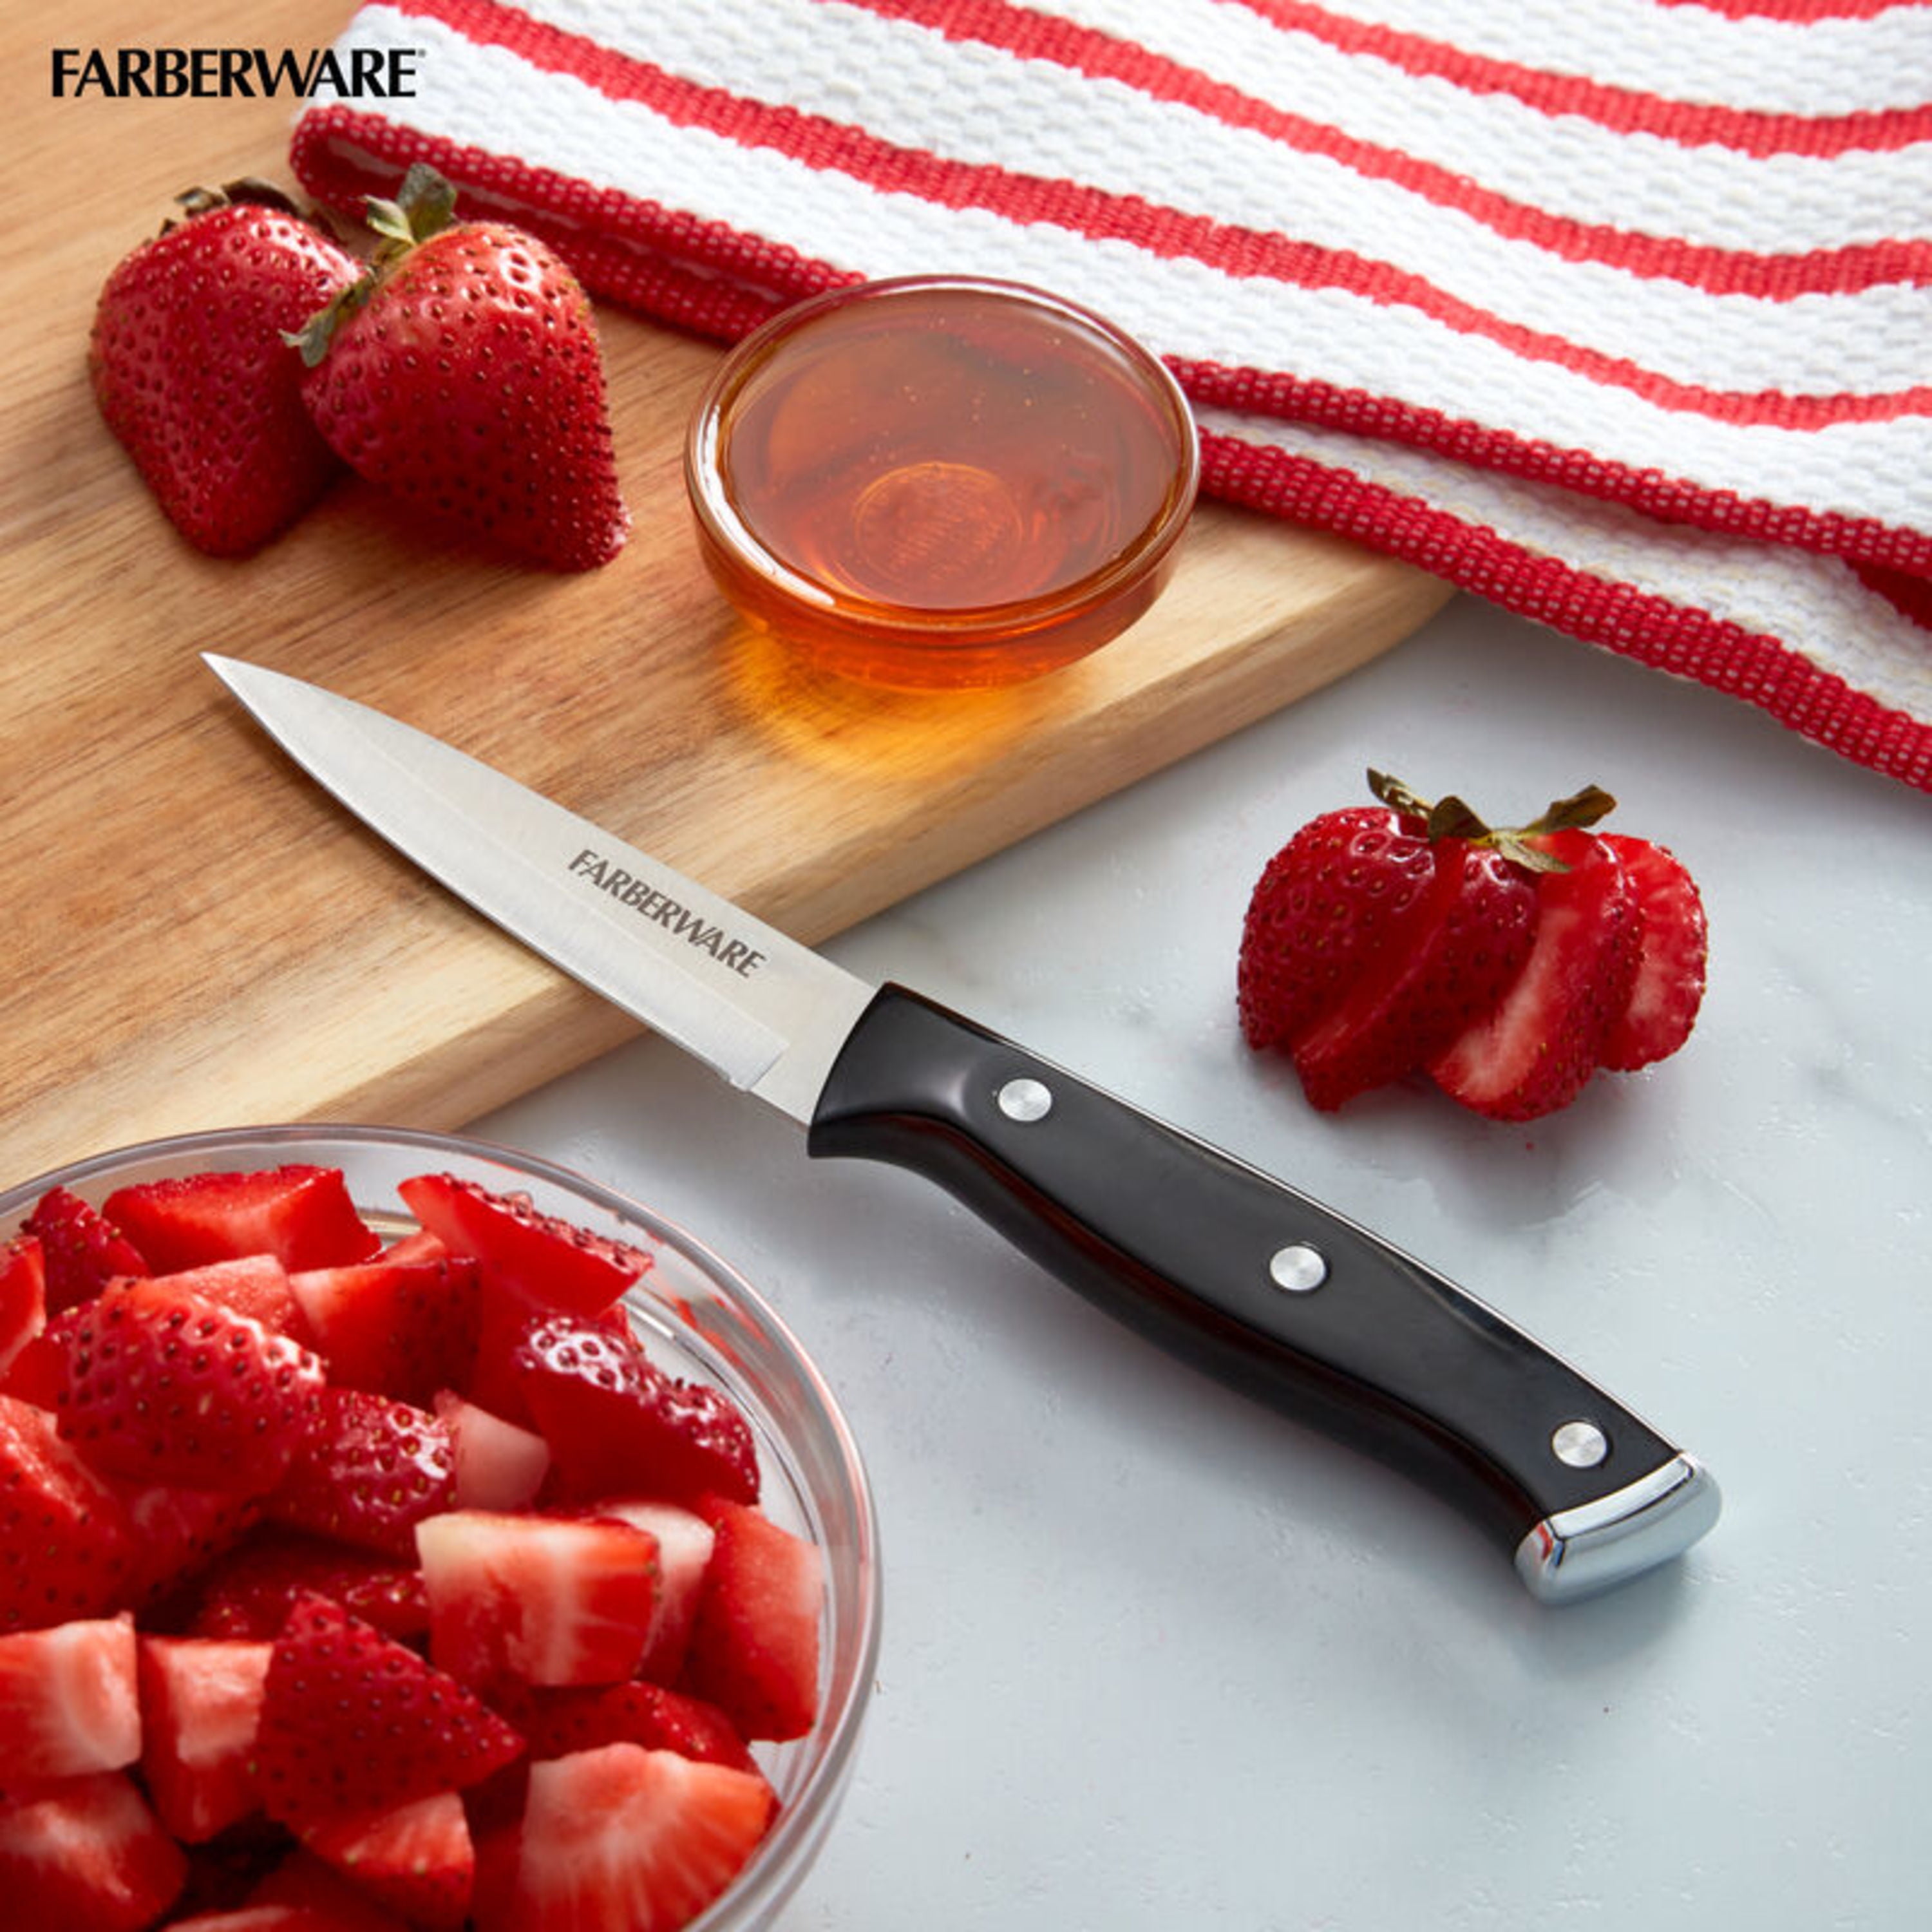 Farberware Professional Ceramic Paring Knife with Red Blade Cover & Handle - 3 in